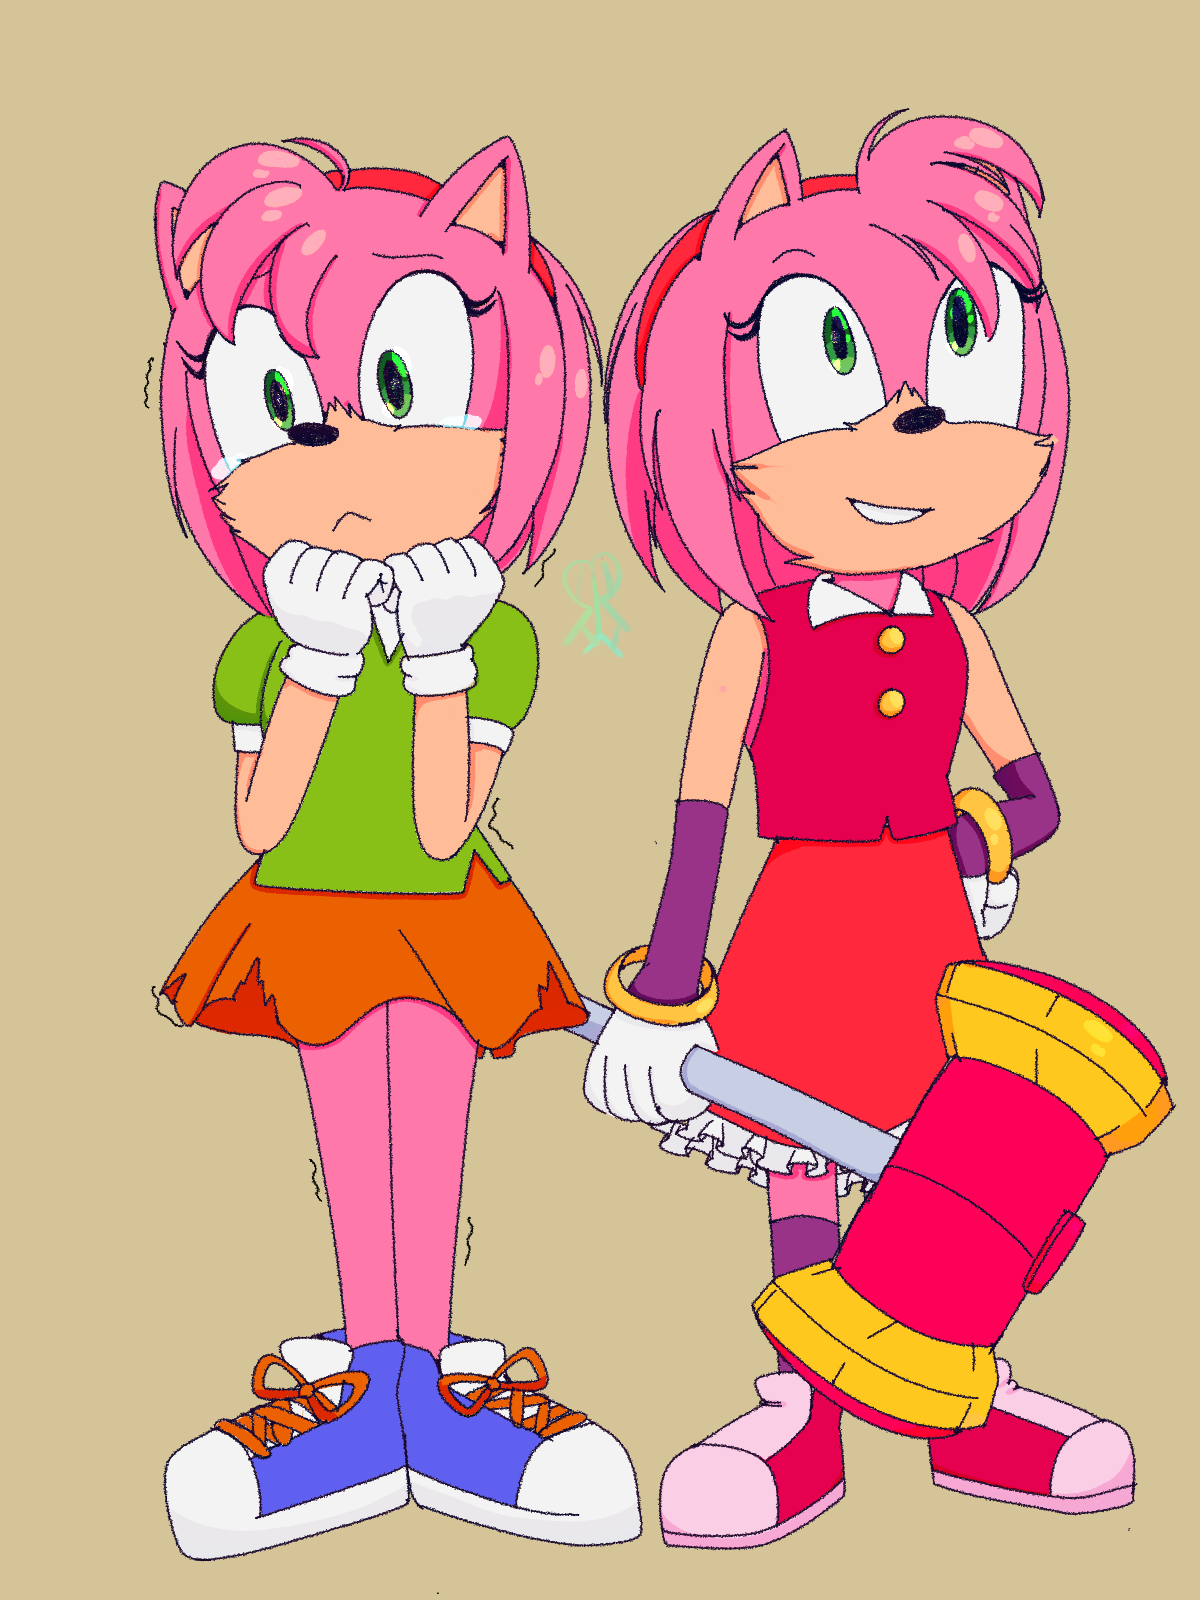 HessoniteArt —  I want Amy to appear in the Sonic 3 movie for